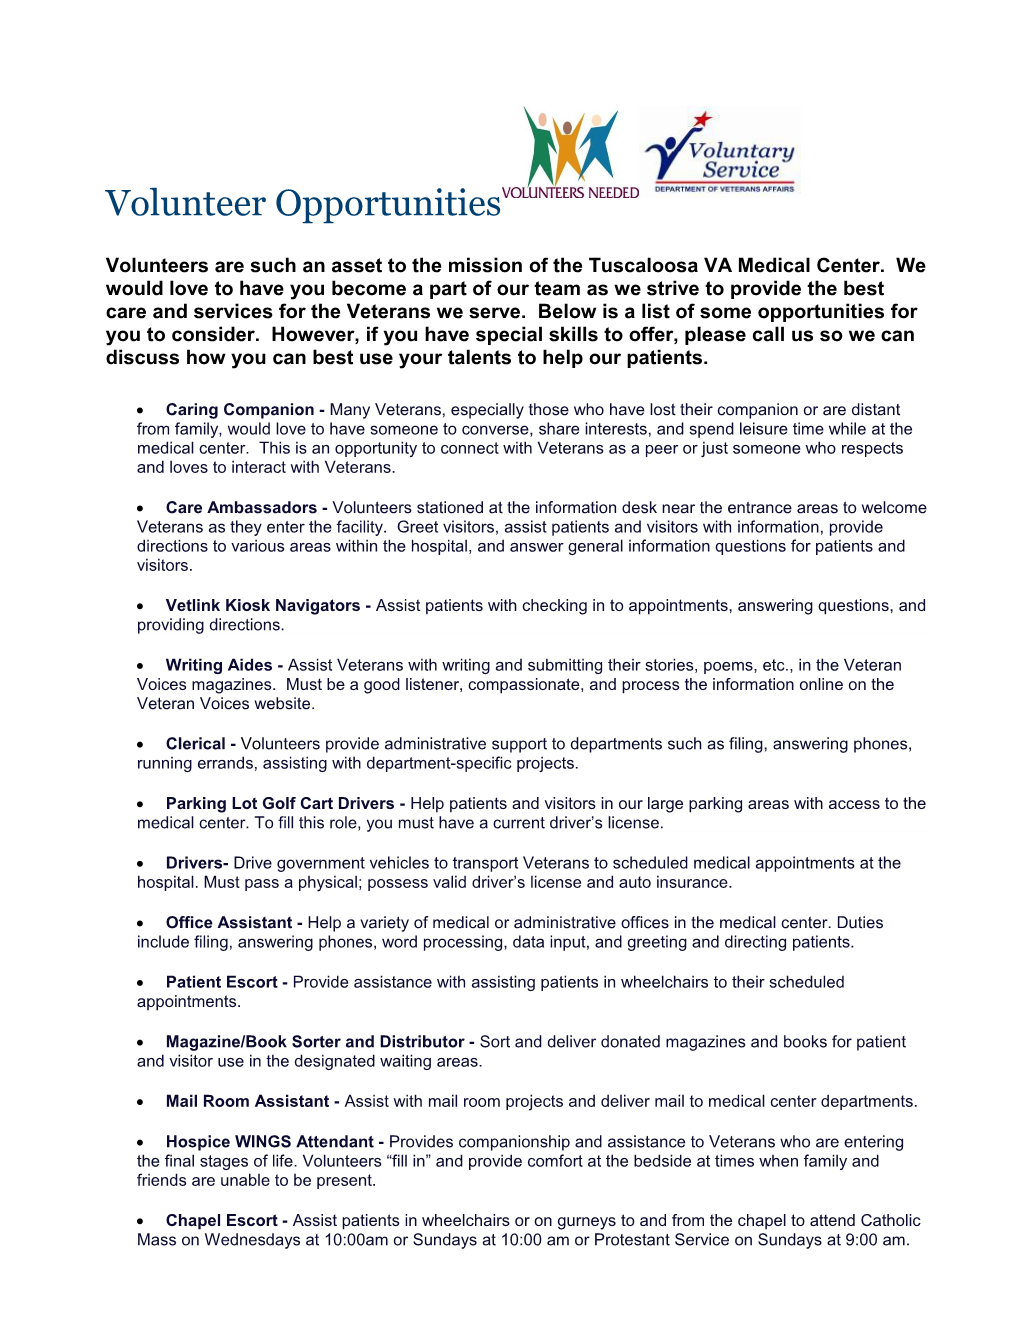 Volunteers Are Such an Asset to the Mission of the Tuscaloosa VA Medical Center. We Would